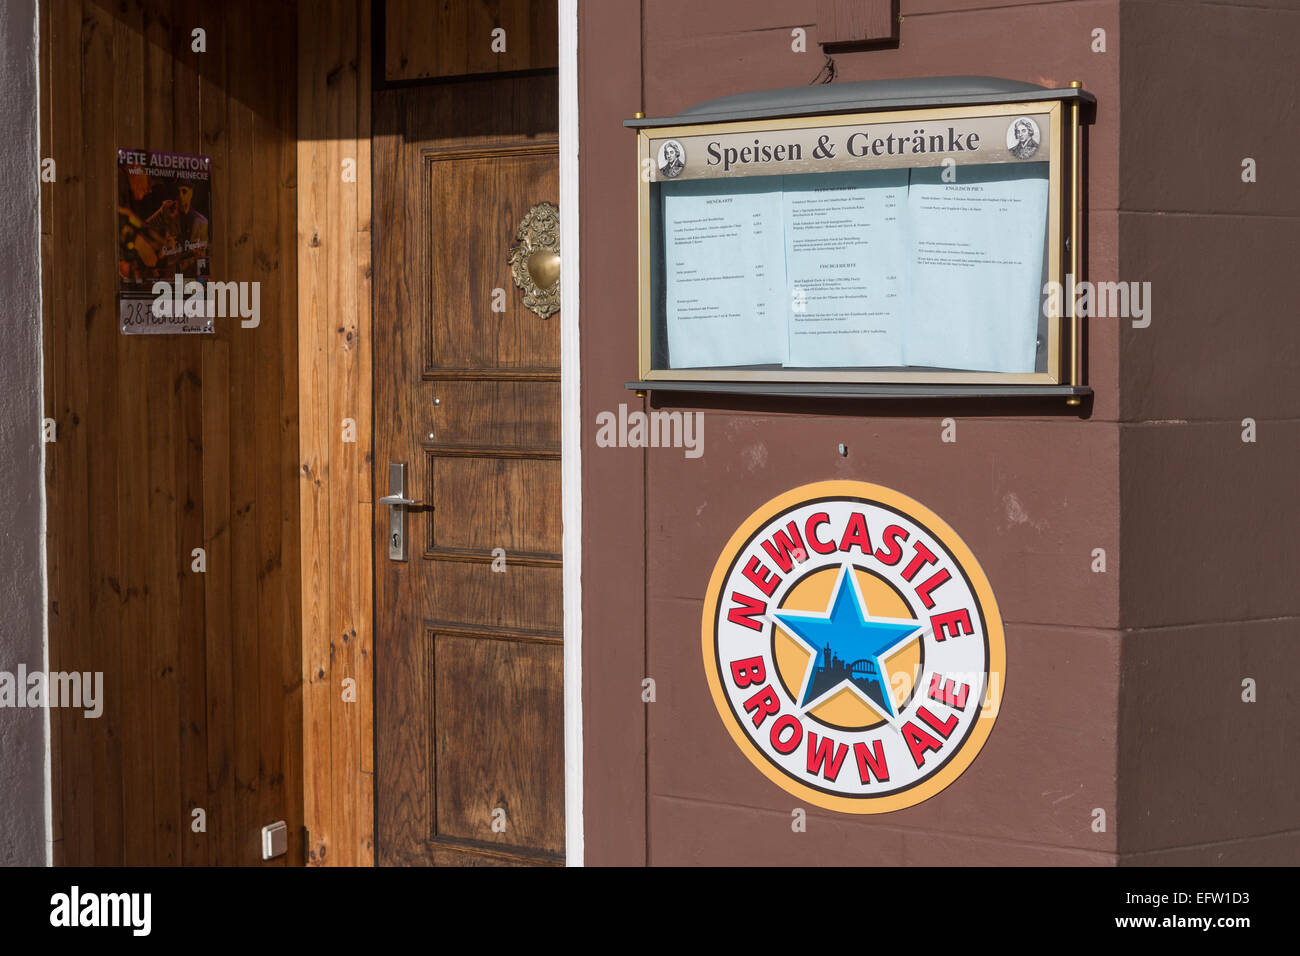 The front of a German restaurant advertises Newcastle Brown Ale below its German menu Stock Photo